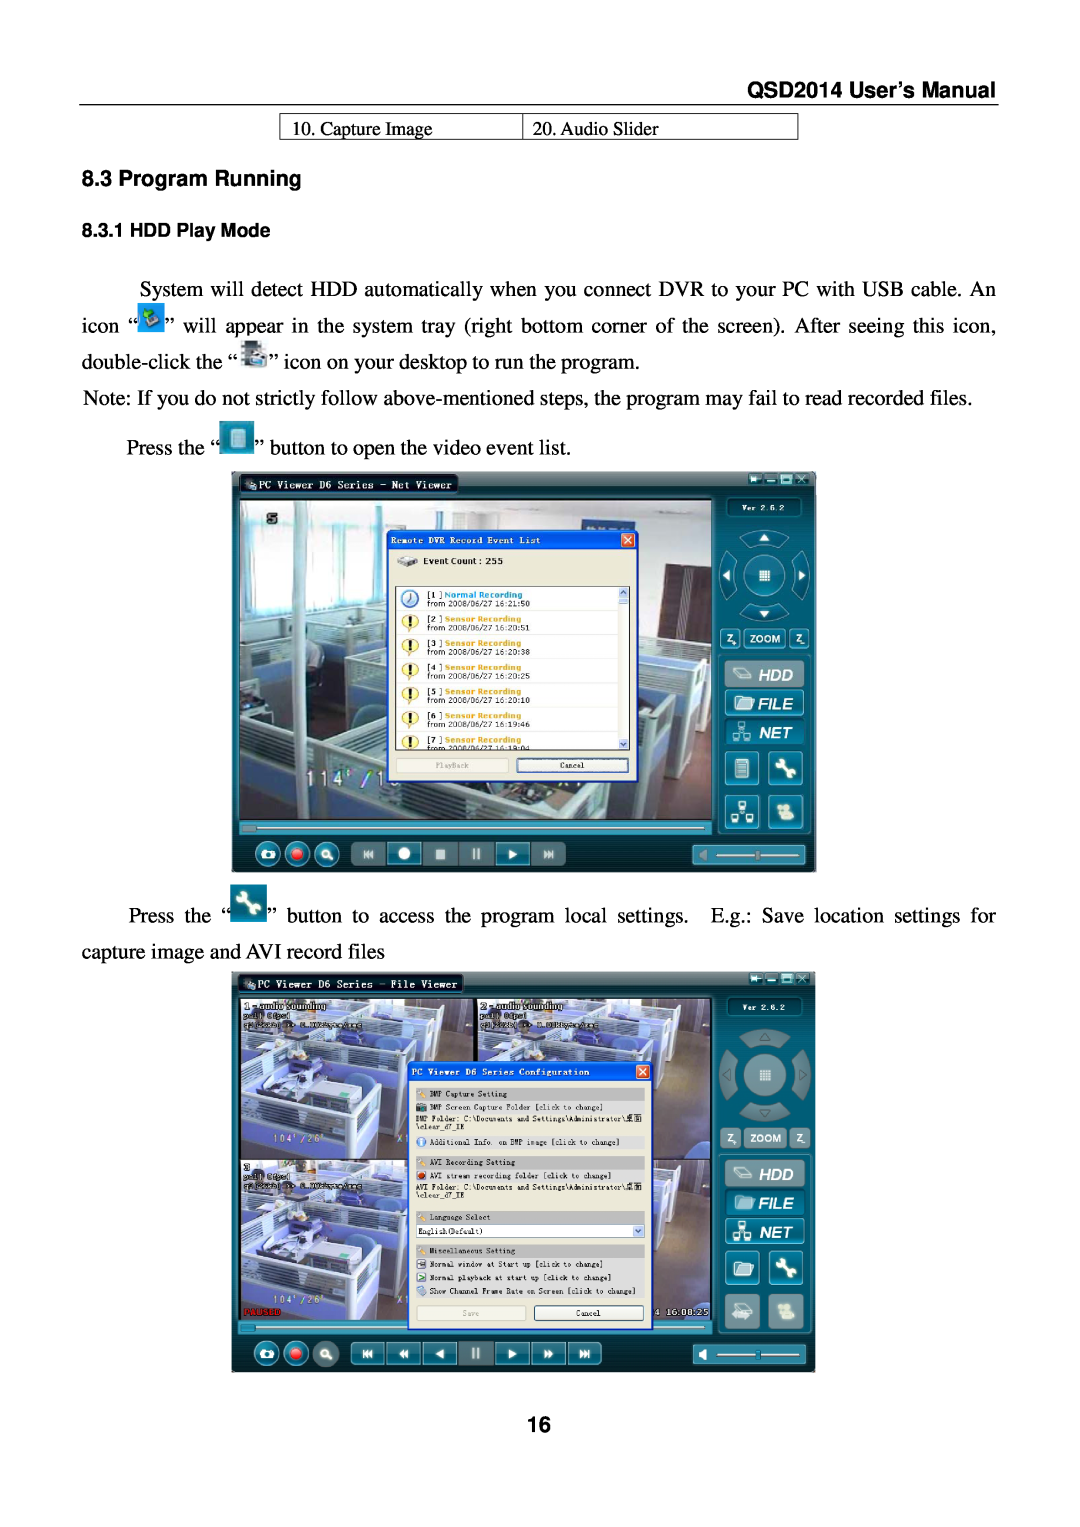 Q-See user manual Program Running, QSD2014 User’s Manual, Capture Image, Audio Slider, HDD Play Mode 